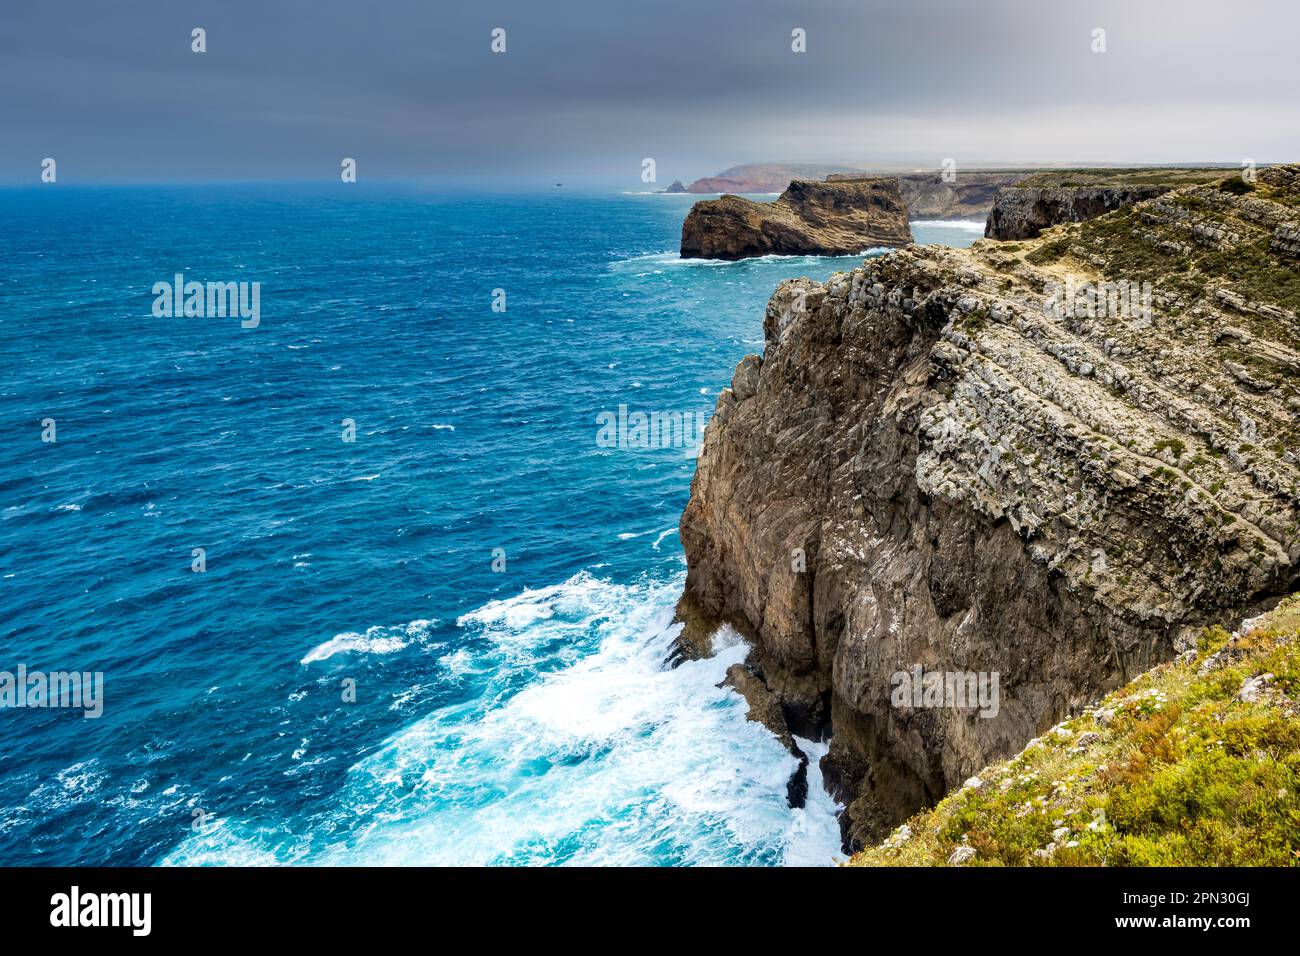 The southwesternmost point of Europe with its rugged landscape, where waves fiercely crash against Cape Saint Vincent cliffs. Stock Photo